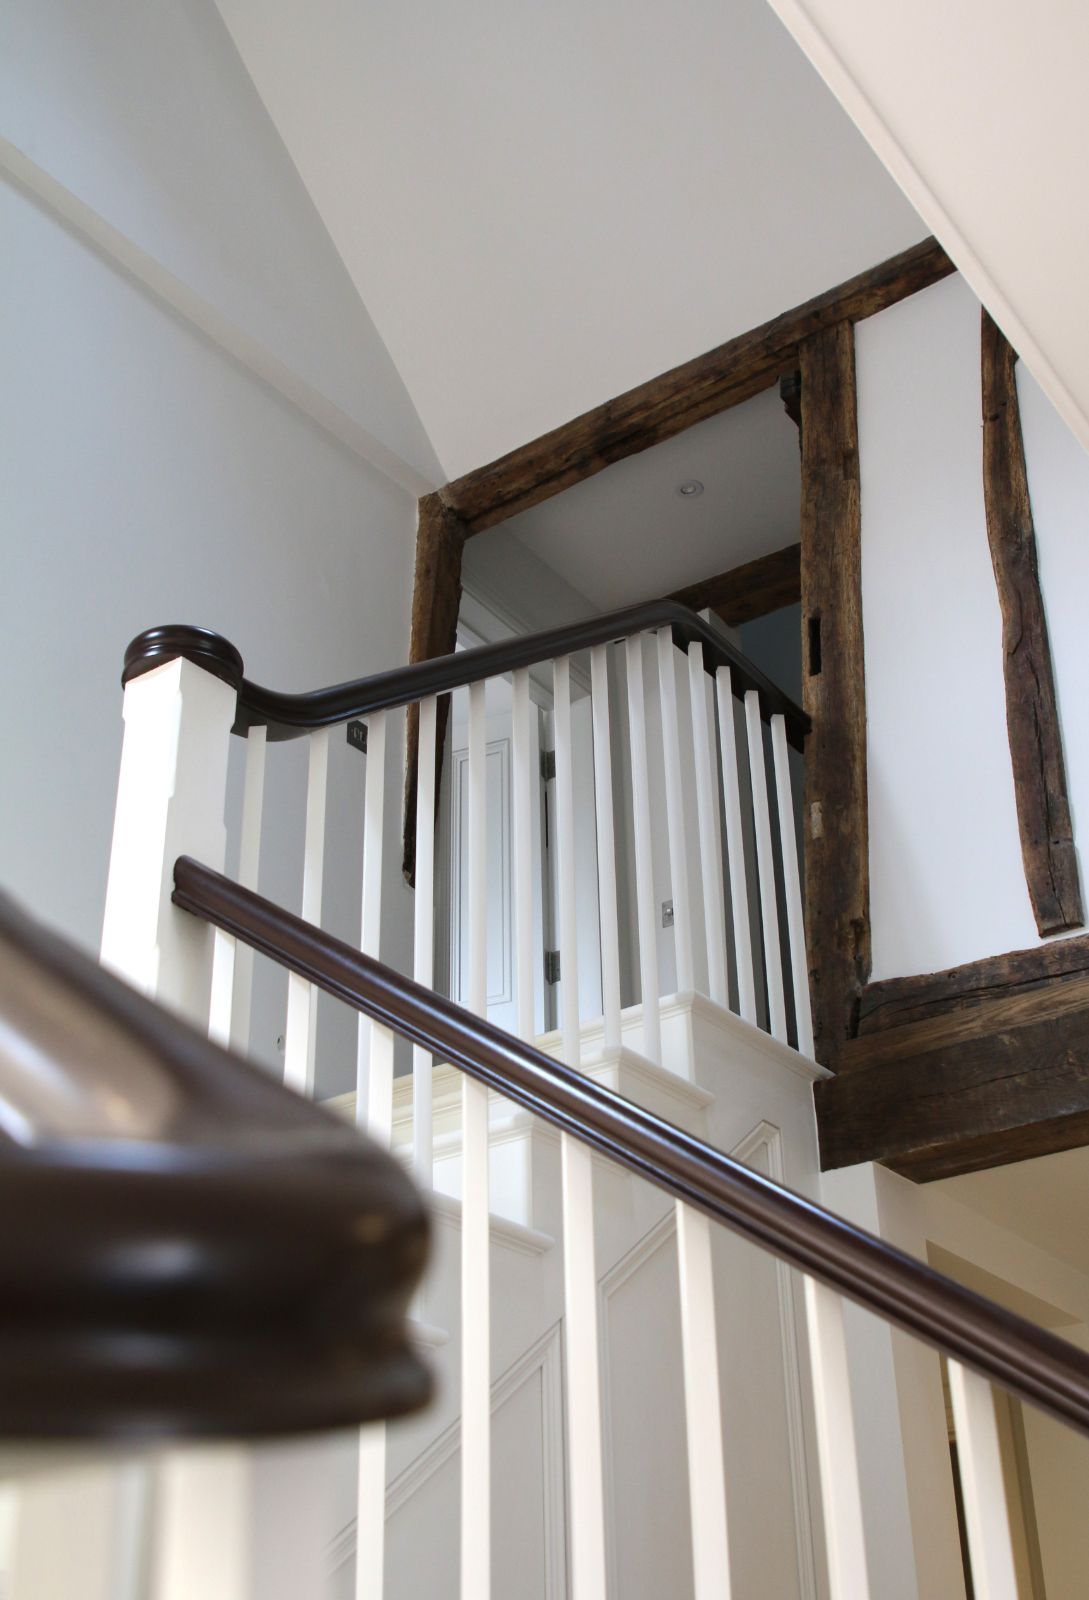 Bespoke Staircases in Essex